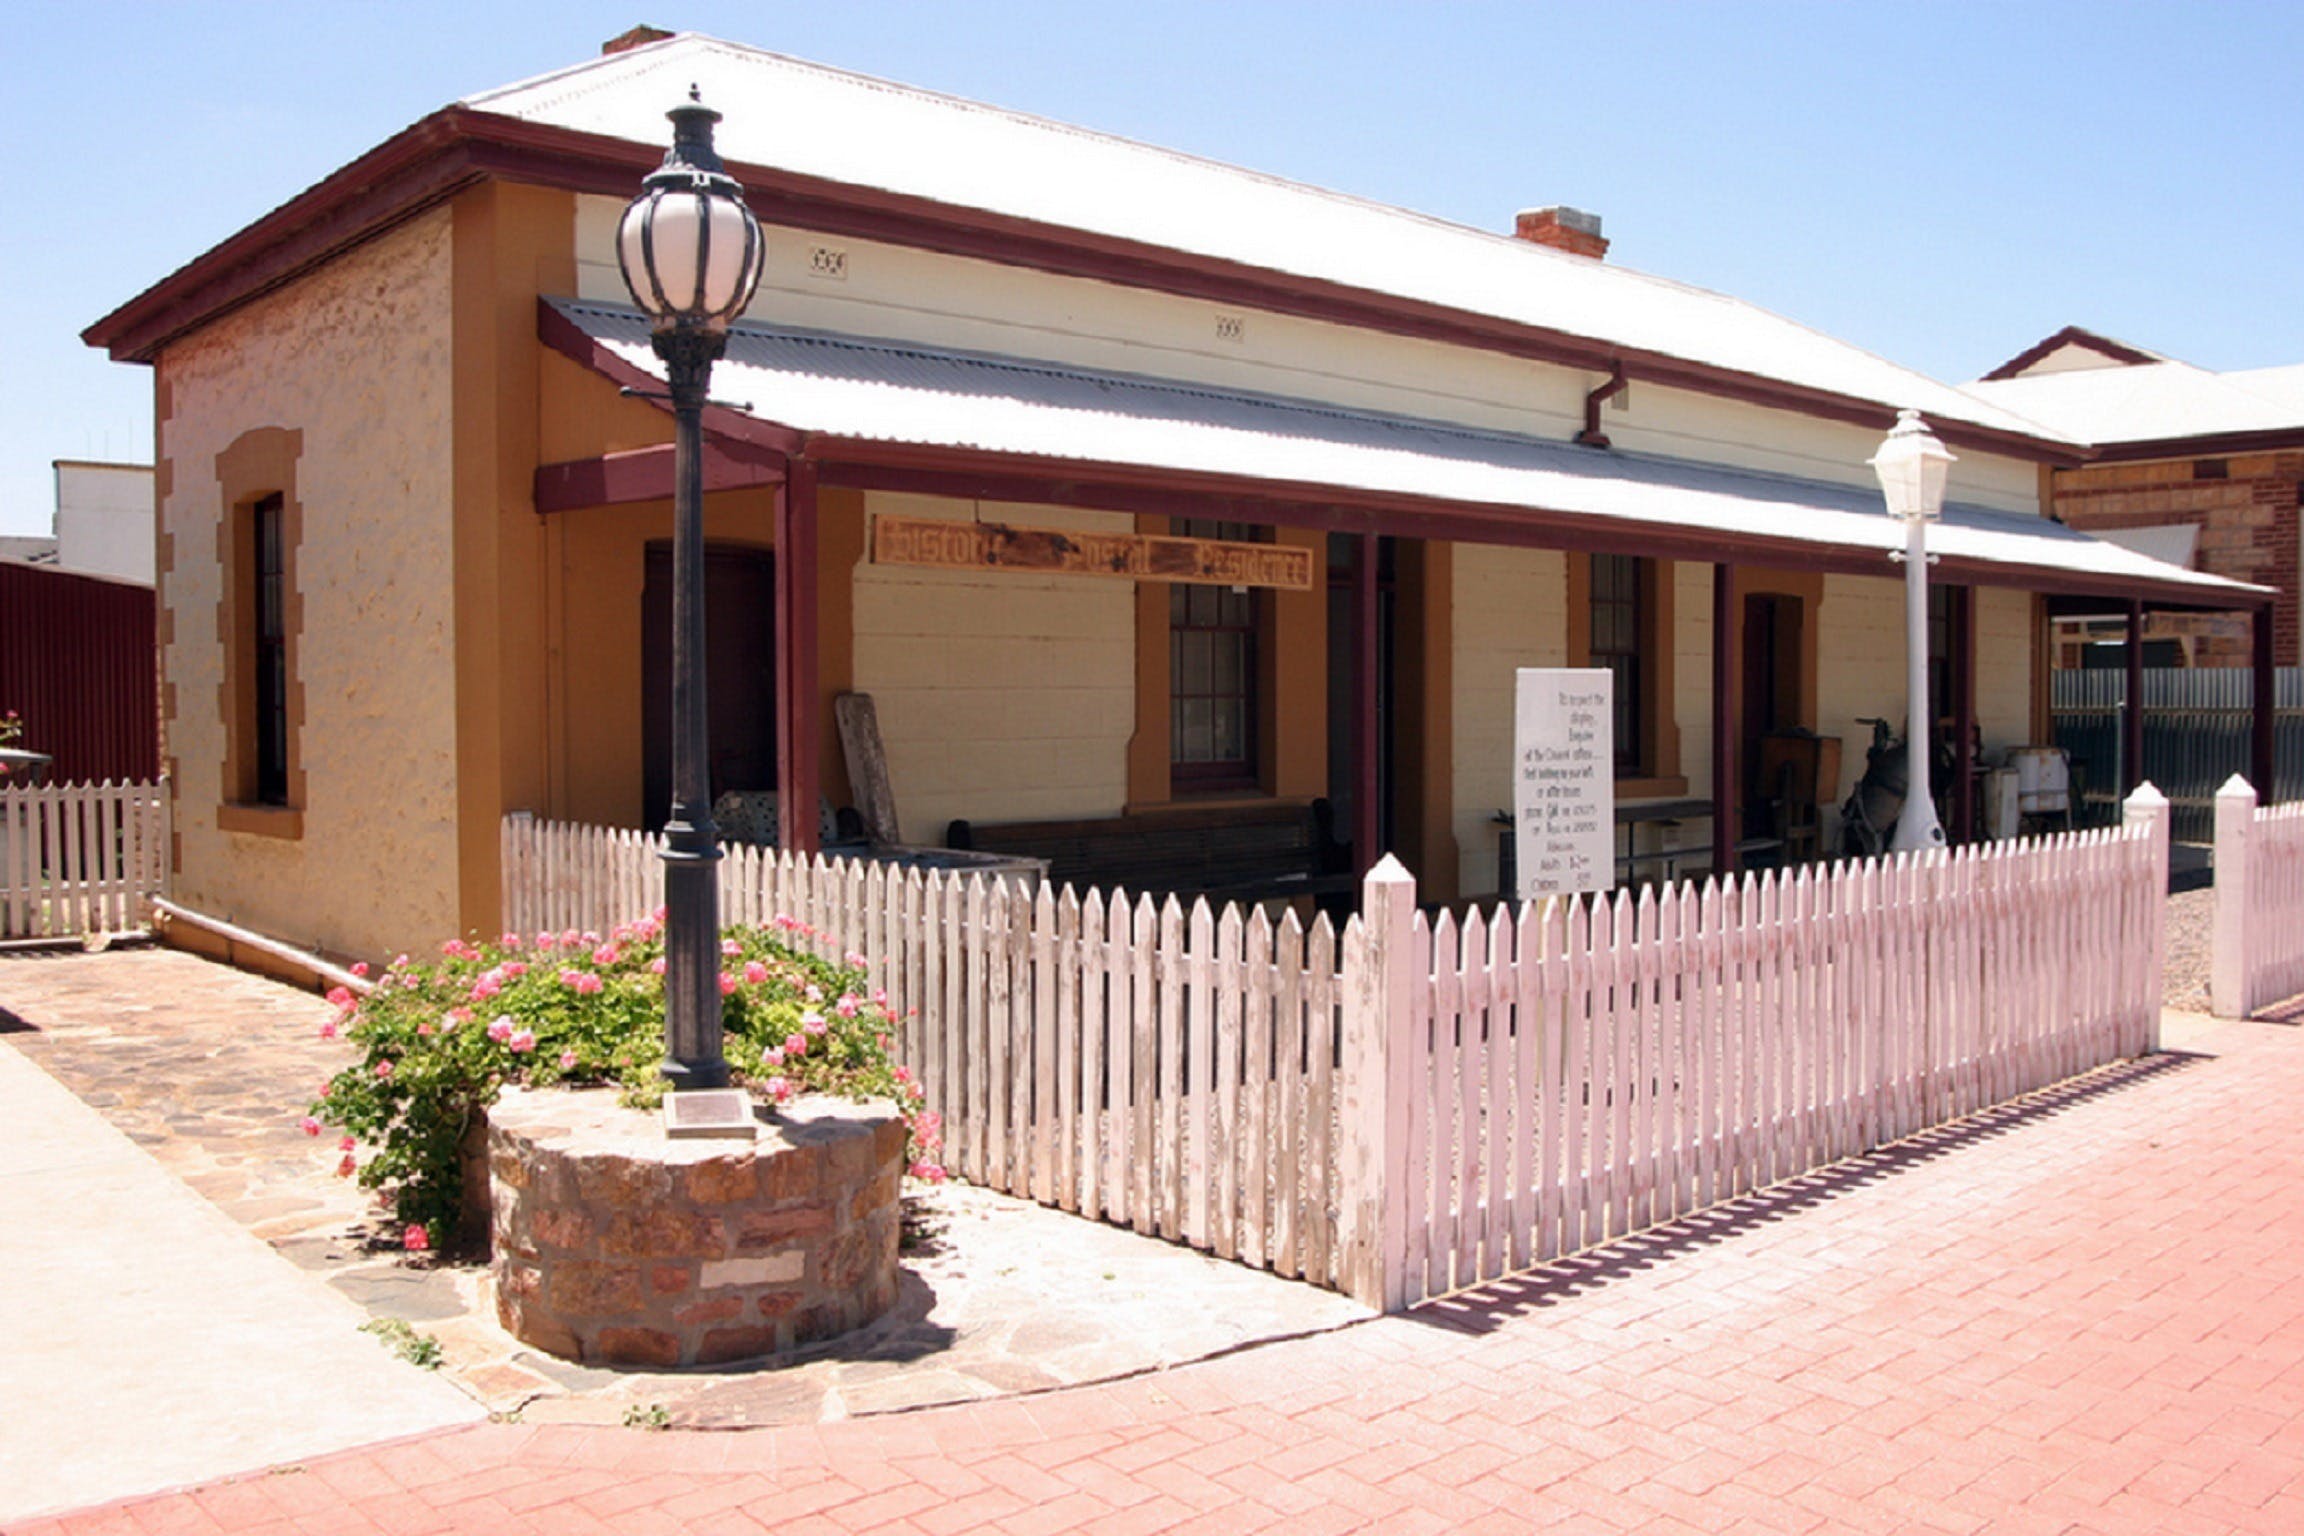 Franklin Harbour Historical Museum - Tourism Adelaide